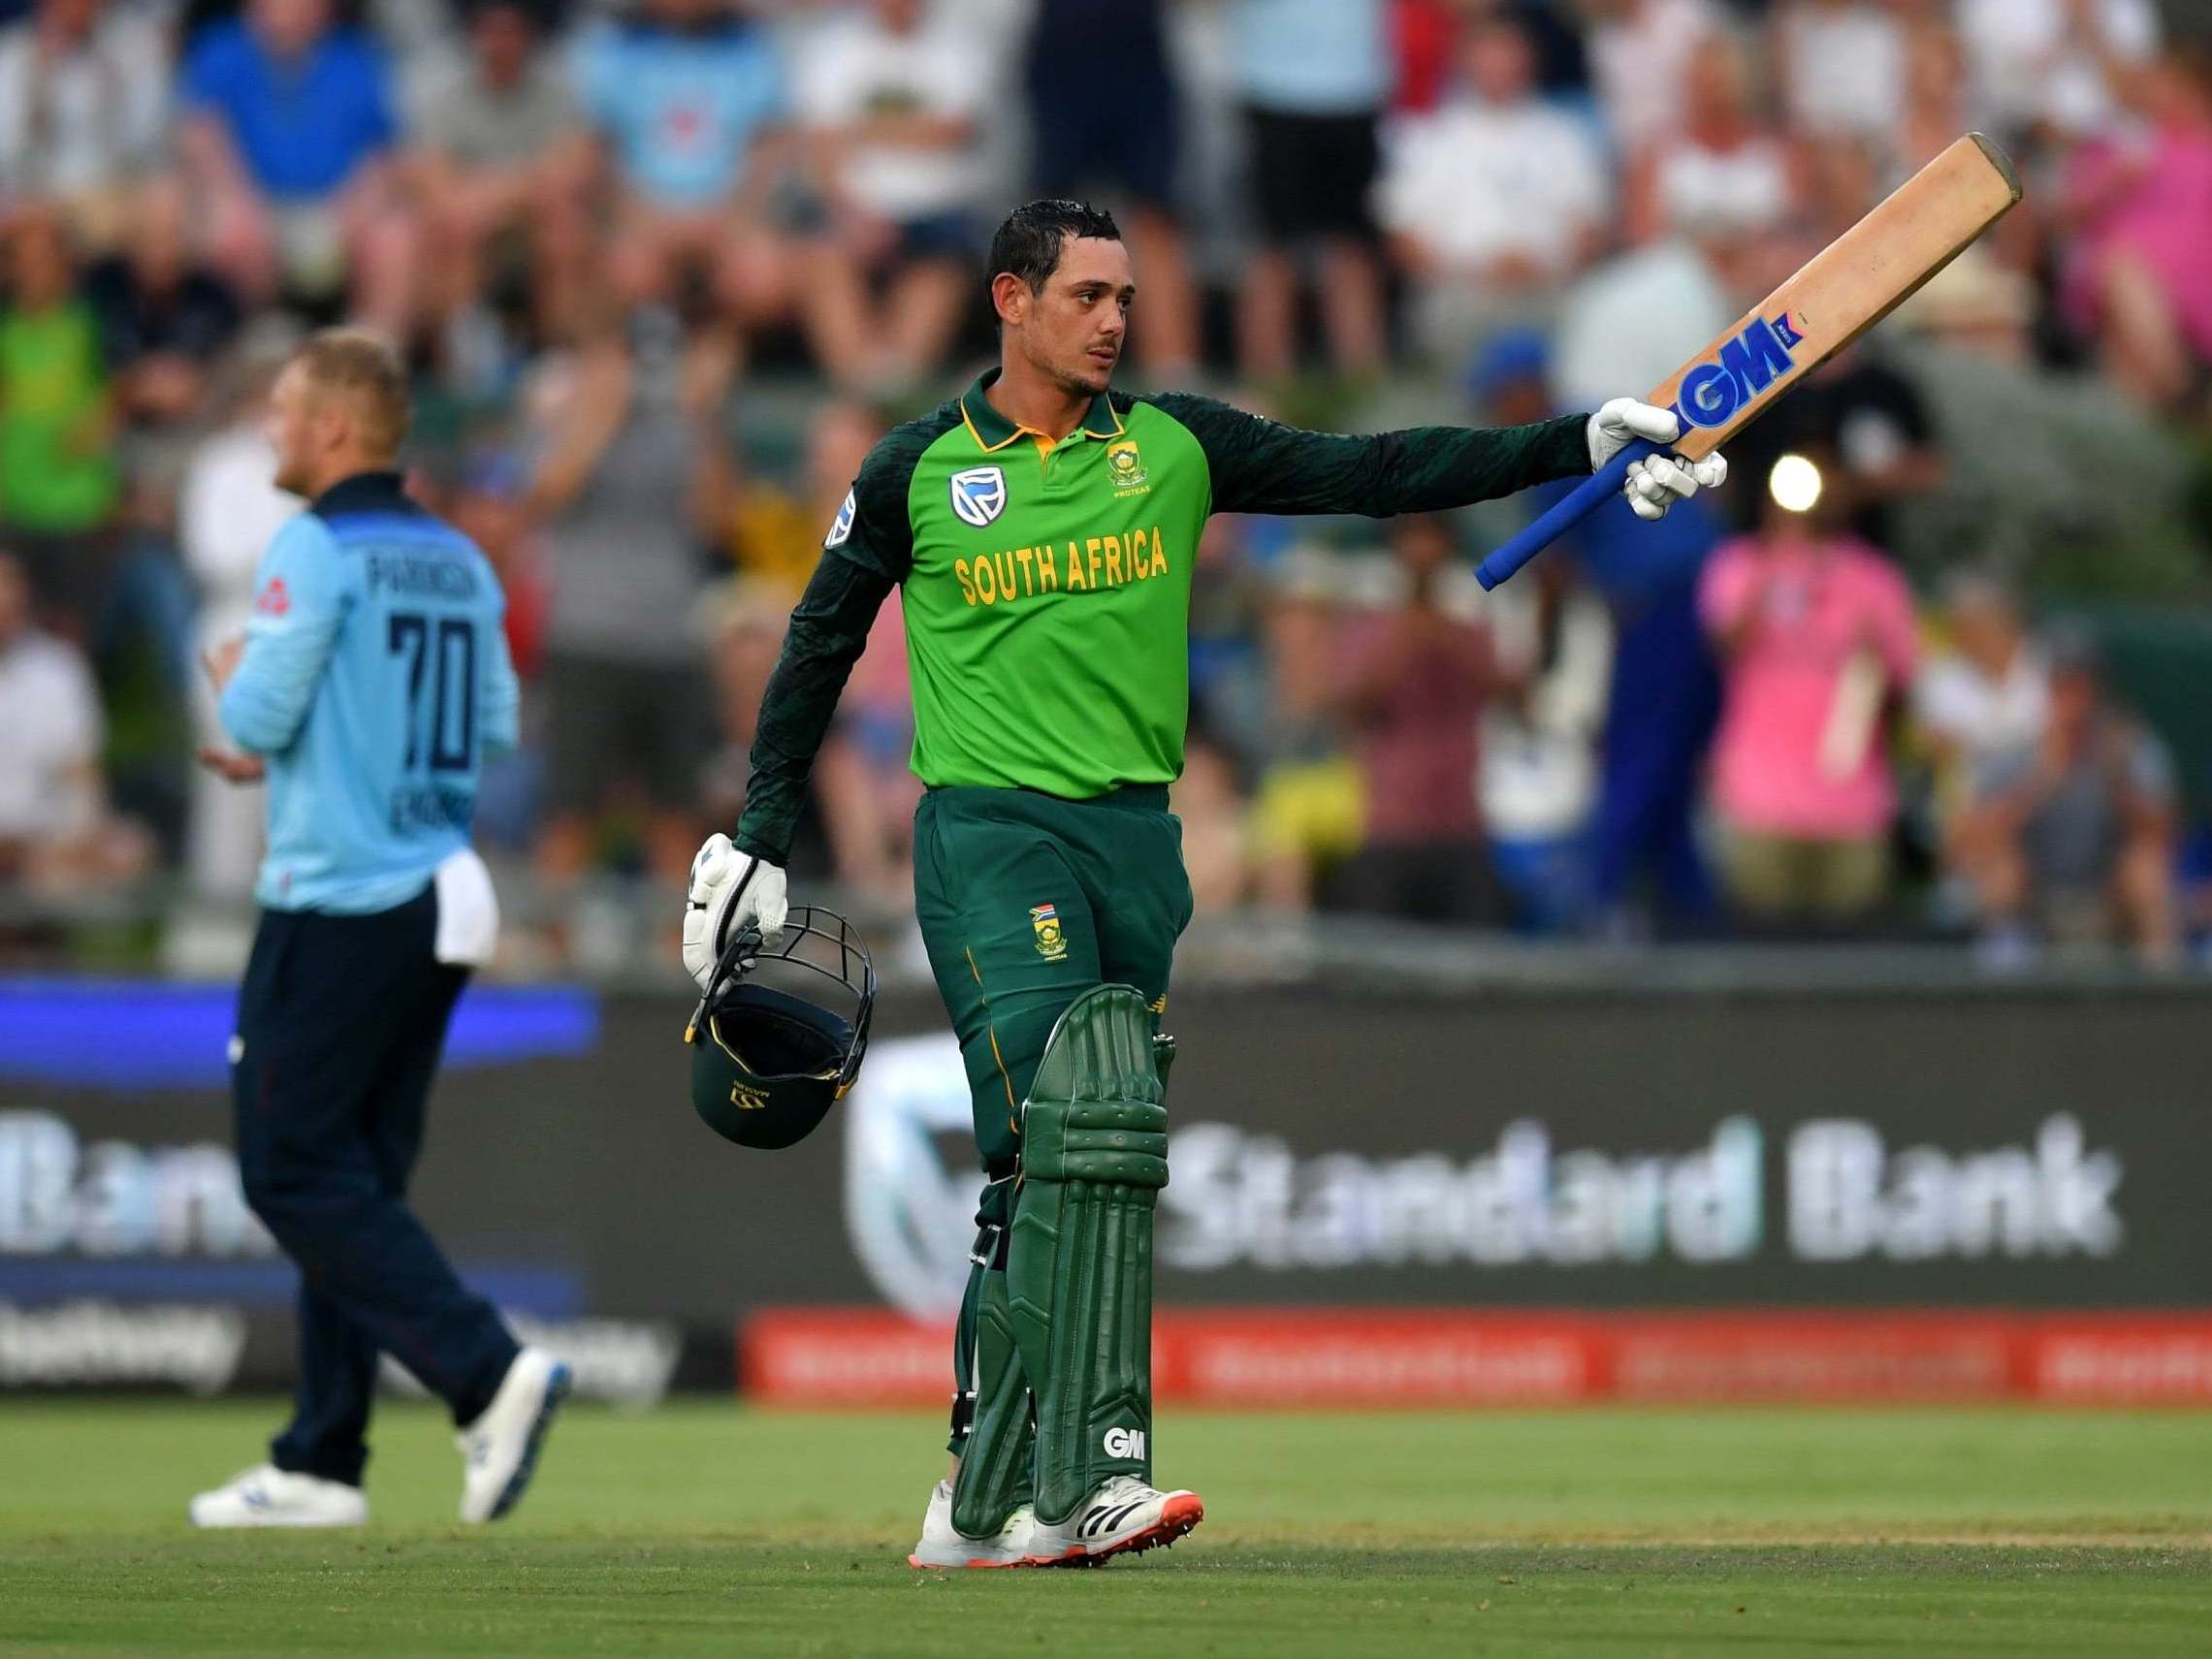 Quinton de Kock's century got South Africa over the line in the first ODI